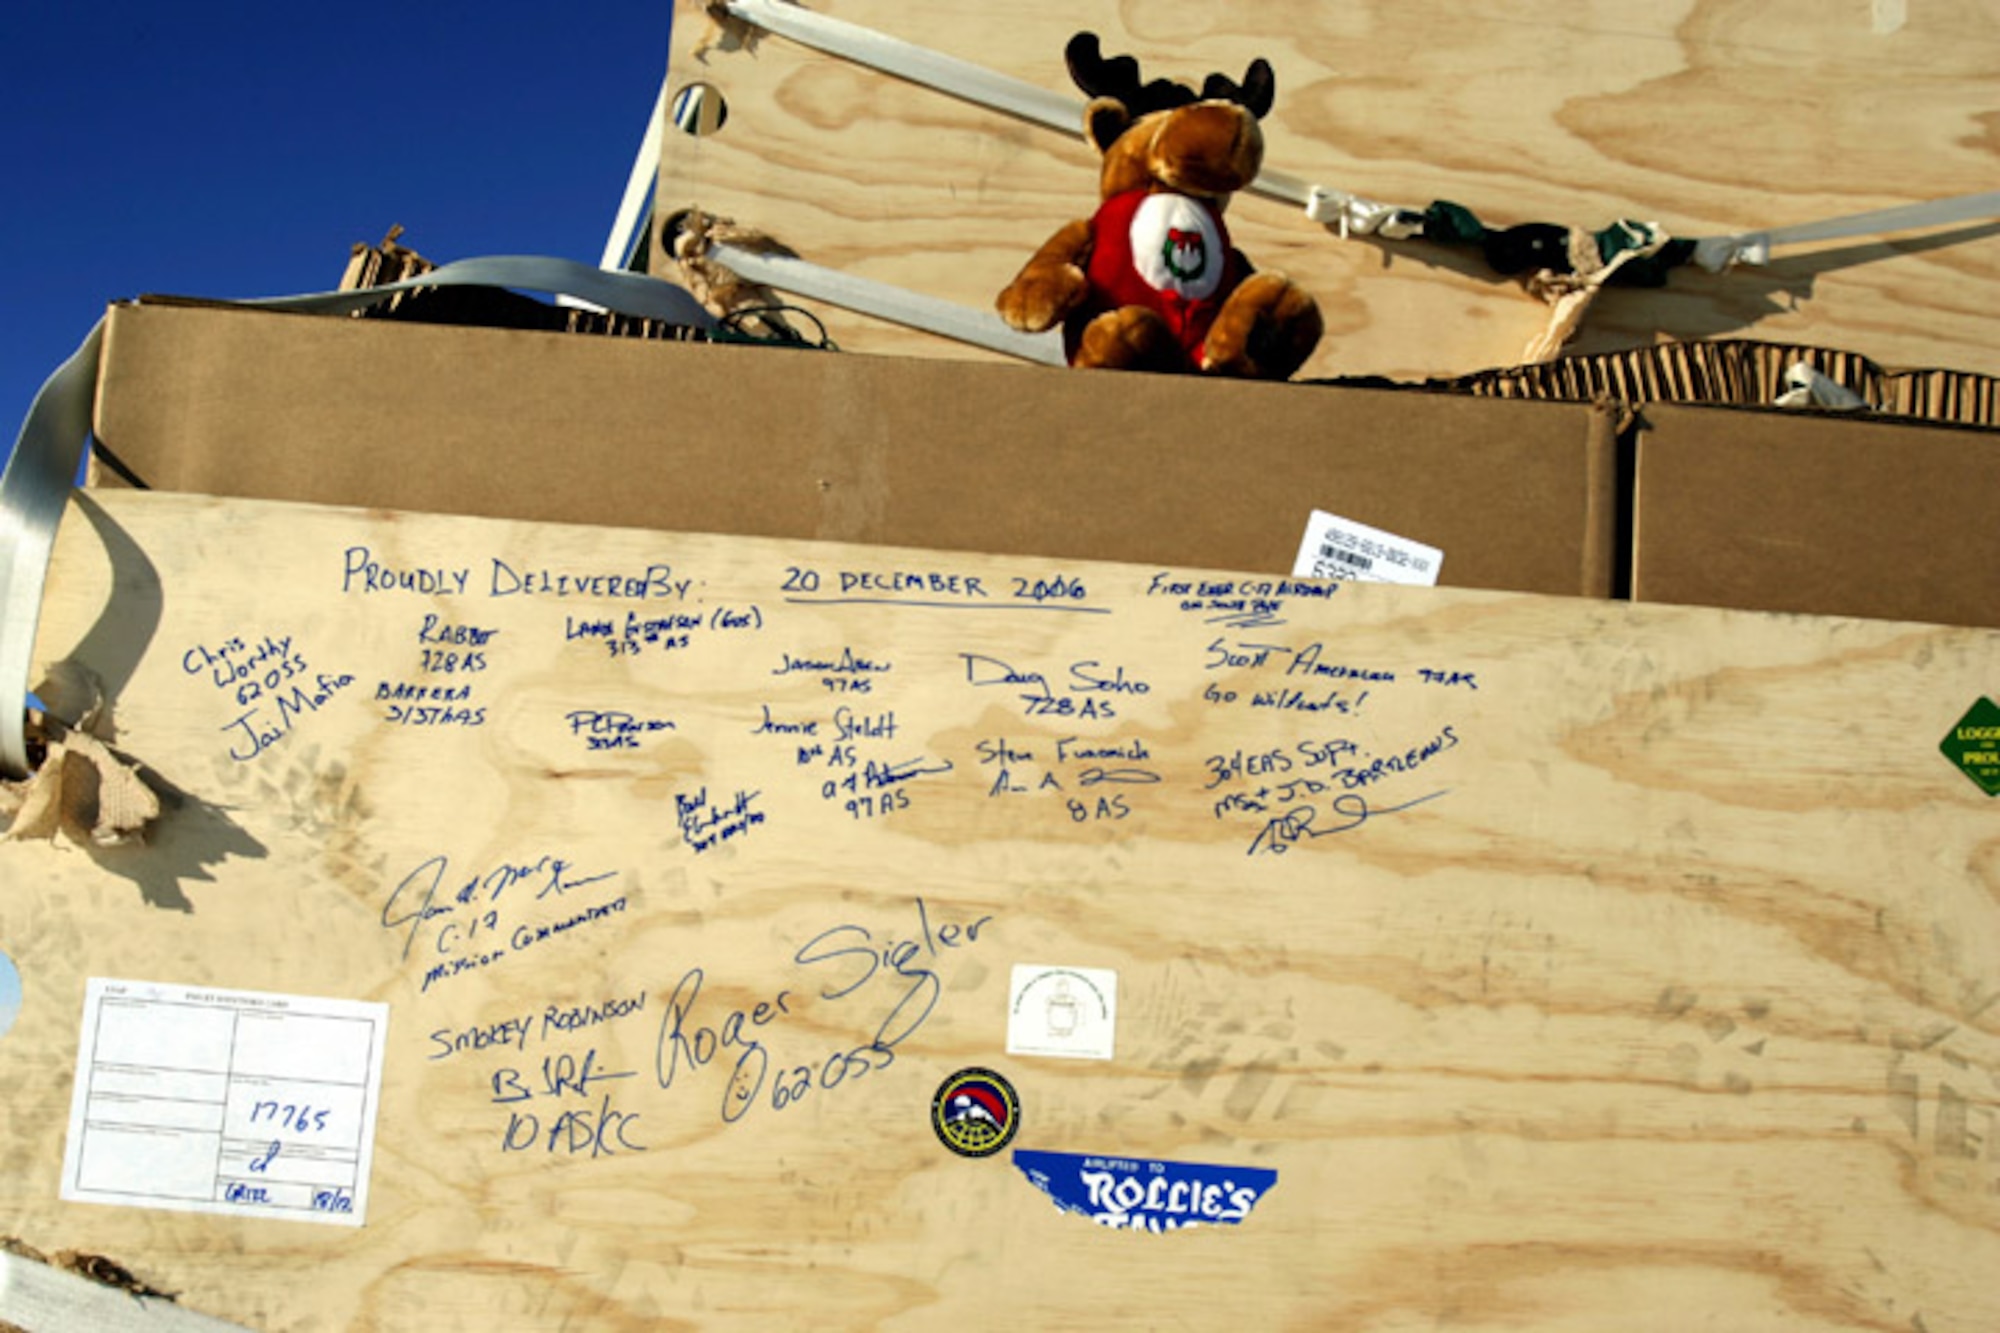 An autographed cargo pallet sits in the snow after being airdropped from a C-17 Globemaster III Dec. 20 to members of the National Science Foundation wintering in the Antarctic.  Airmen from the 62nd and 446th Airlift Wings at McChord Air Force Base, Wash., delivered 70 tons of supplies to the team. The mission was a "proof of concept" flight for the C-17 and was part of Joint Task Force-Support Forces Antarctica's Operation Deep Freeze.  (U.S. Air Force photo/Lt. Col. James McGann)